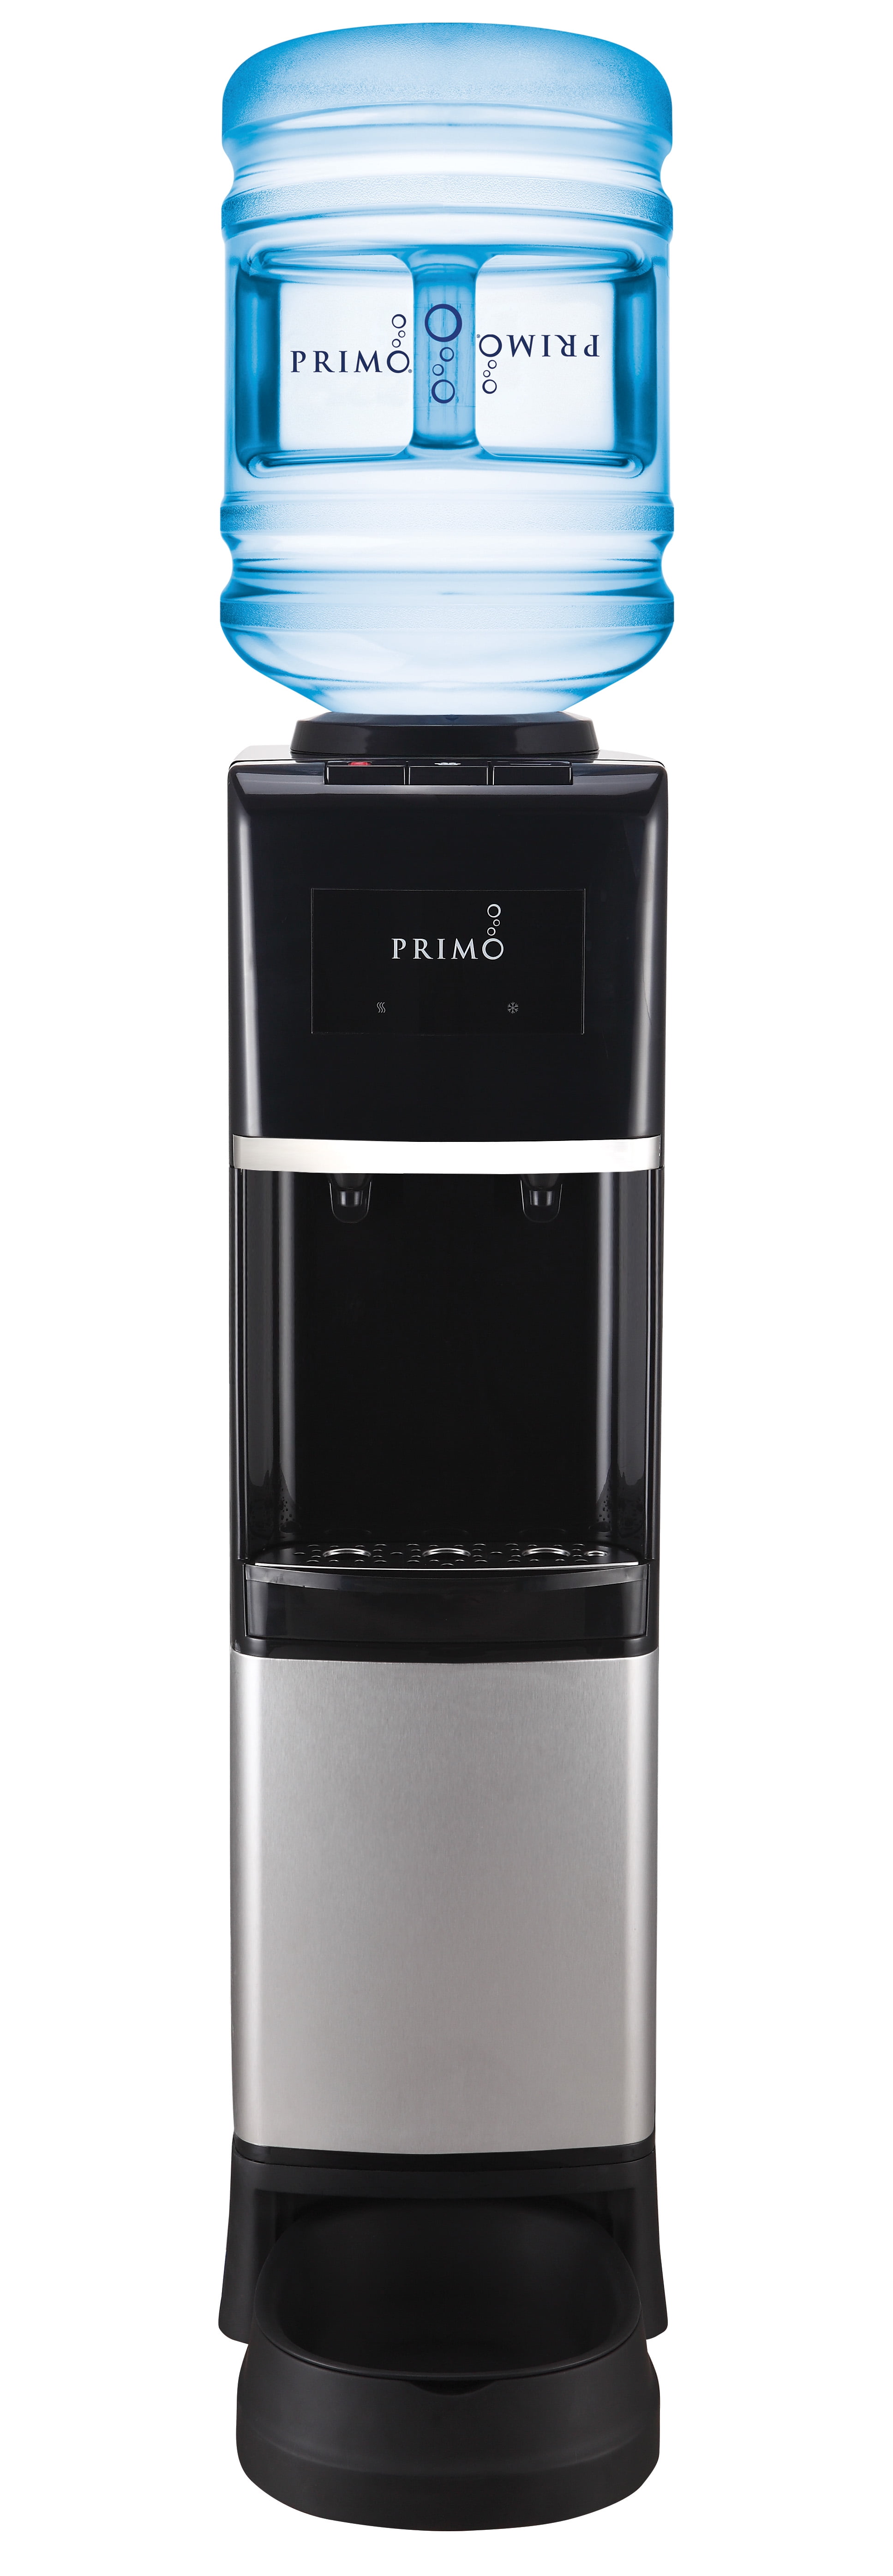 My Review of the Primo Water Dispenser - Dengarden